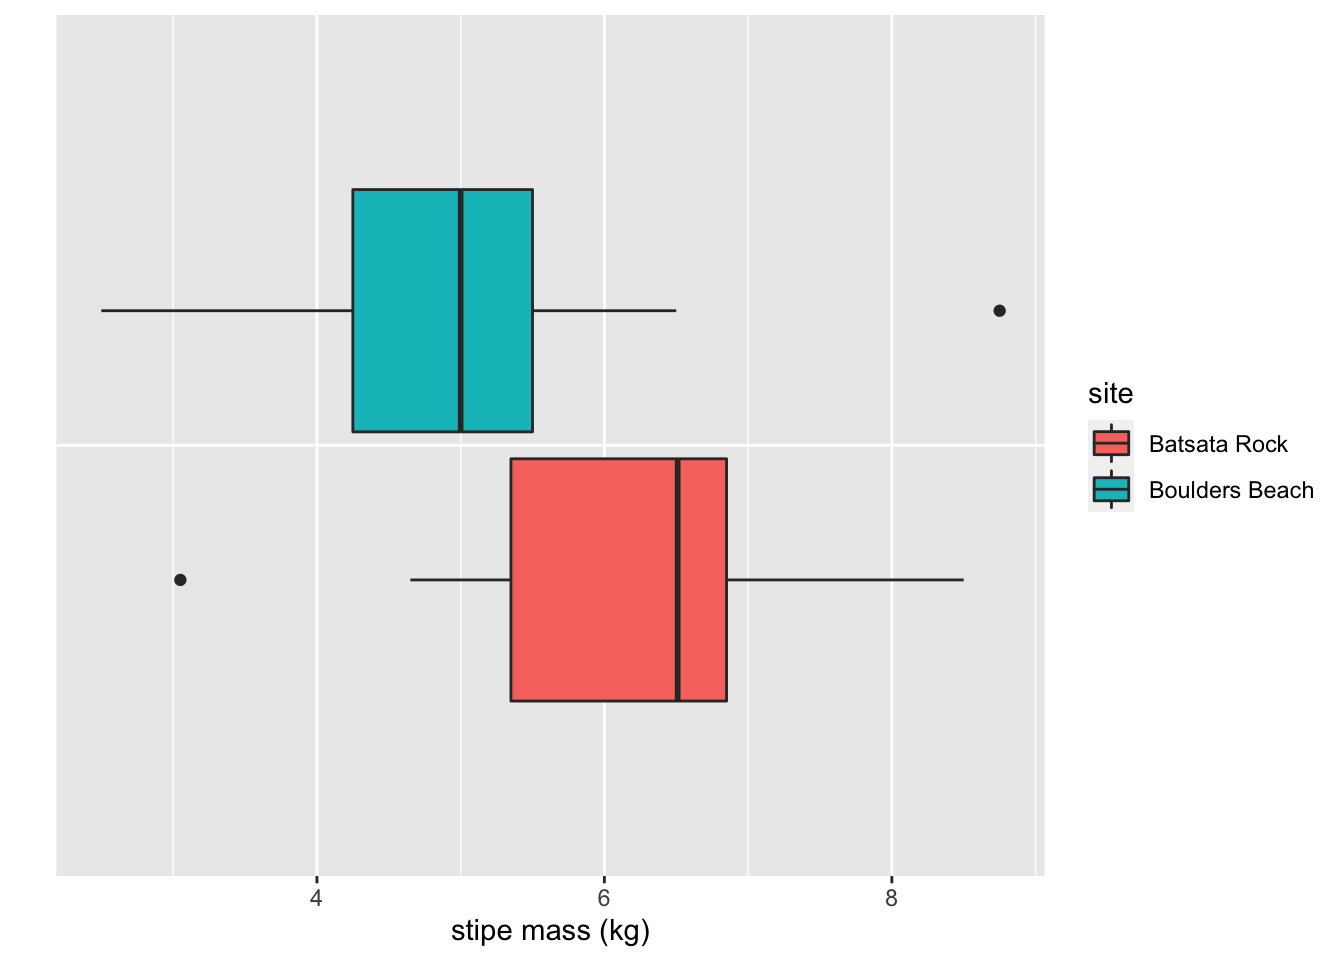 Boxplots showing the difference in stipe mass (kg) of the kelp _Ecklonia maxima_ at two sites in False Bay.